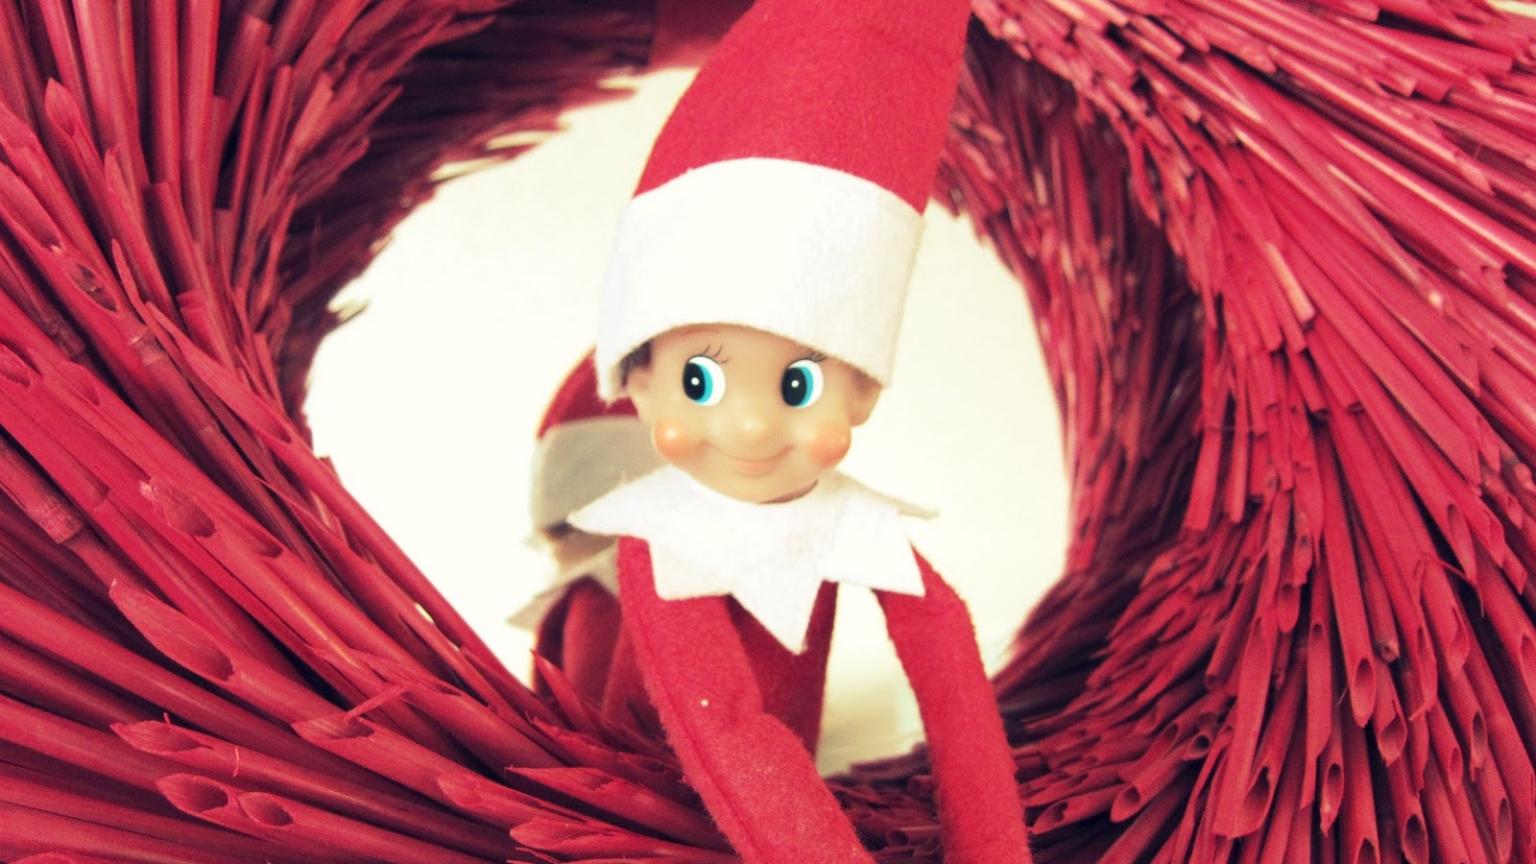 Free download Video Description Our Elf on the Shelf whose